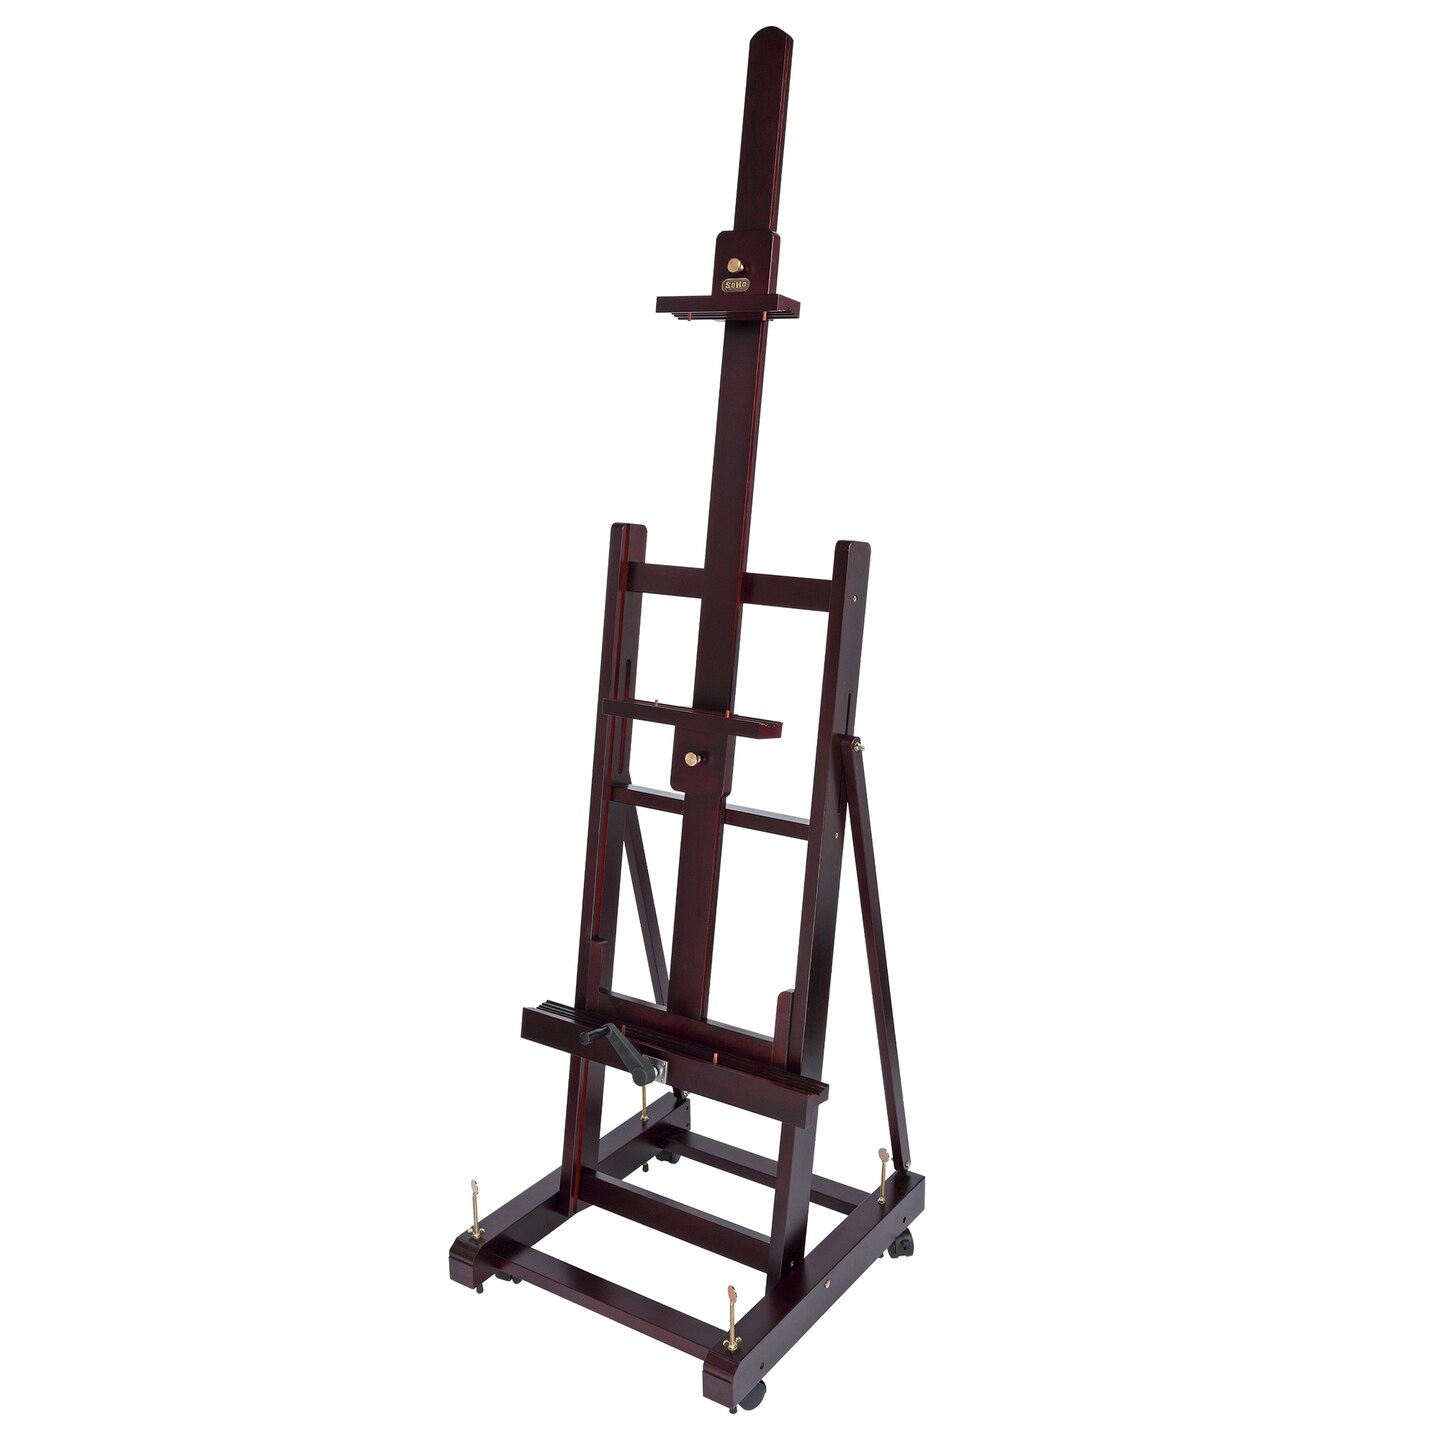 SoHo Urban Artist Pro Easel - Professional H-Frame Easel for Artists, Large Works of Art, Functionality, Easy to Move, &#x26; More!